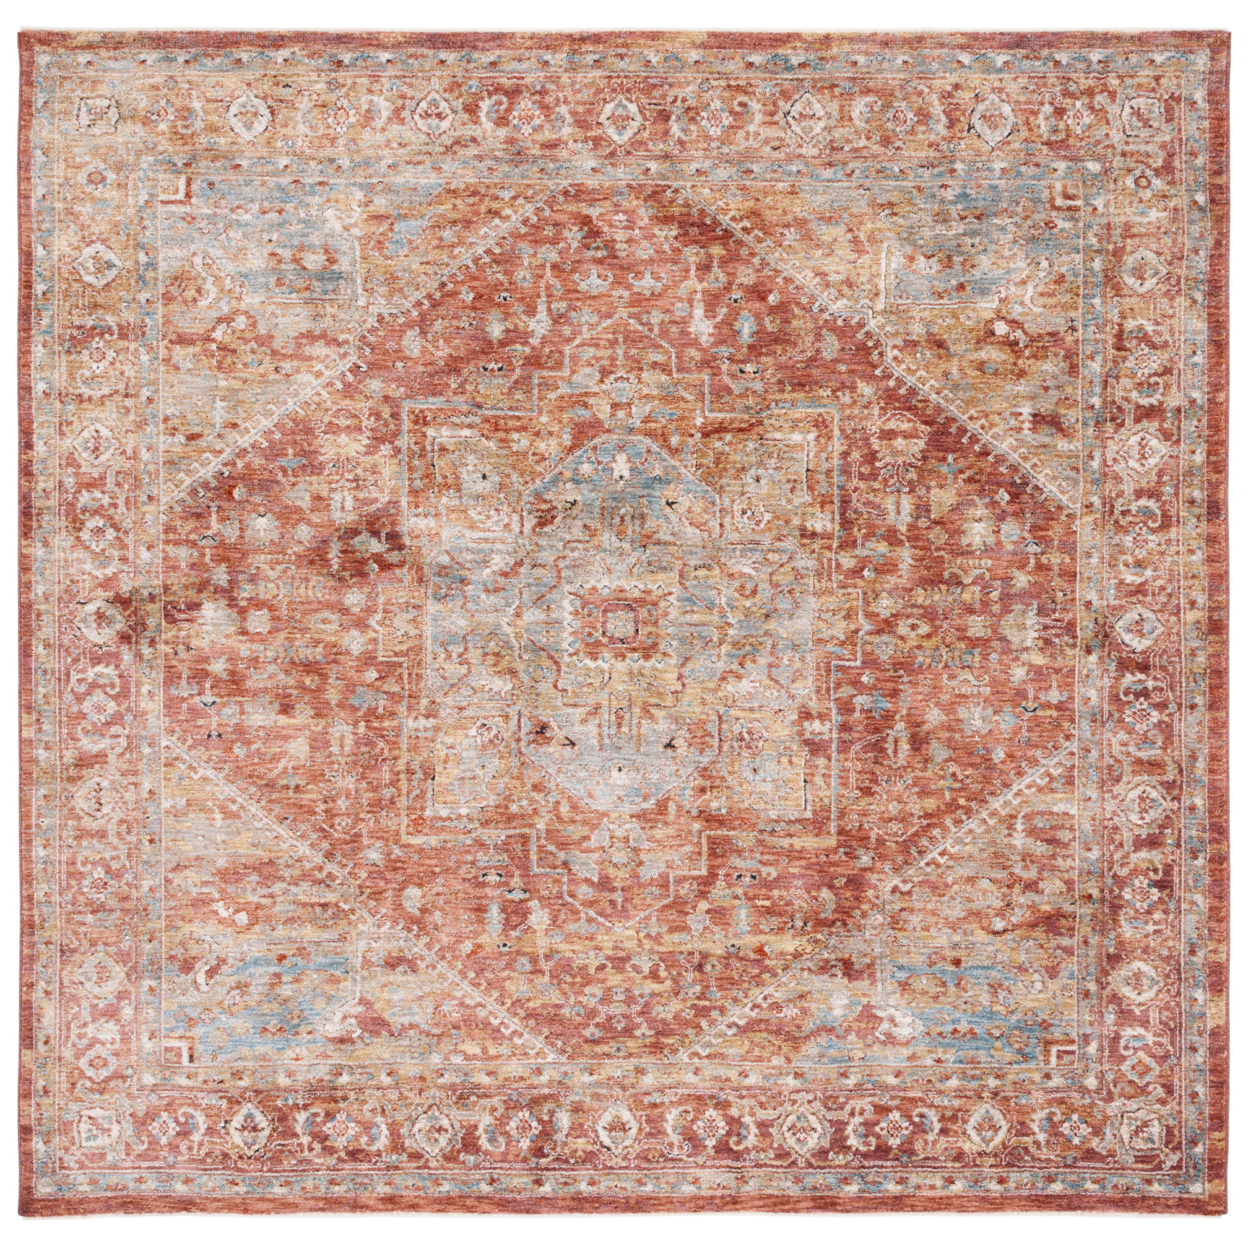 SAFAVIEH Valencia Collection VAL568P Rust/Beige Blue Rug - 6' 4 Square